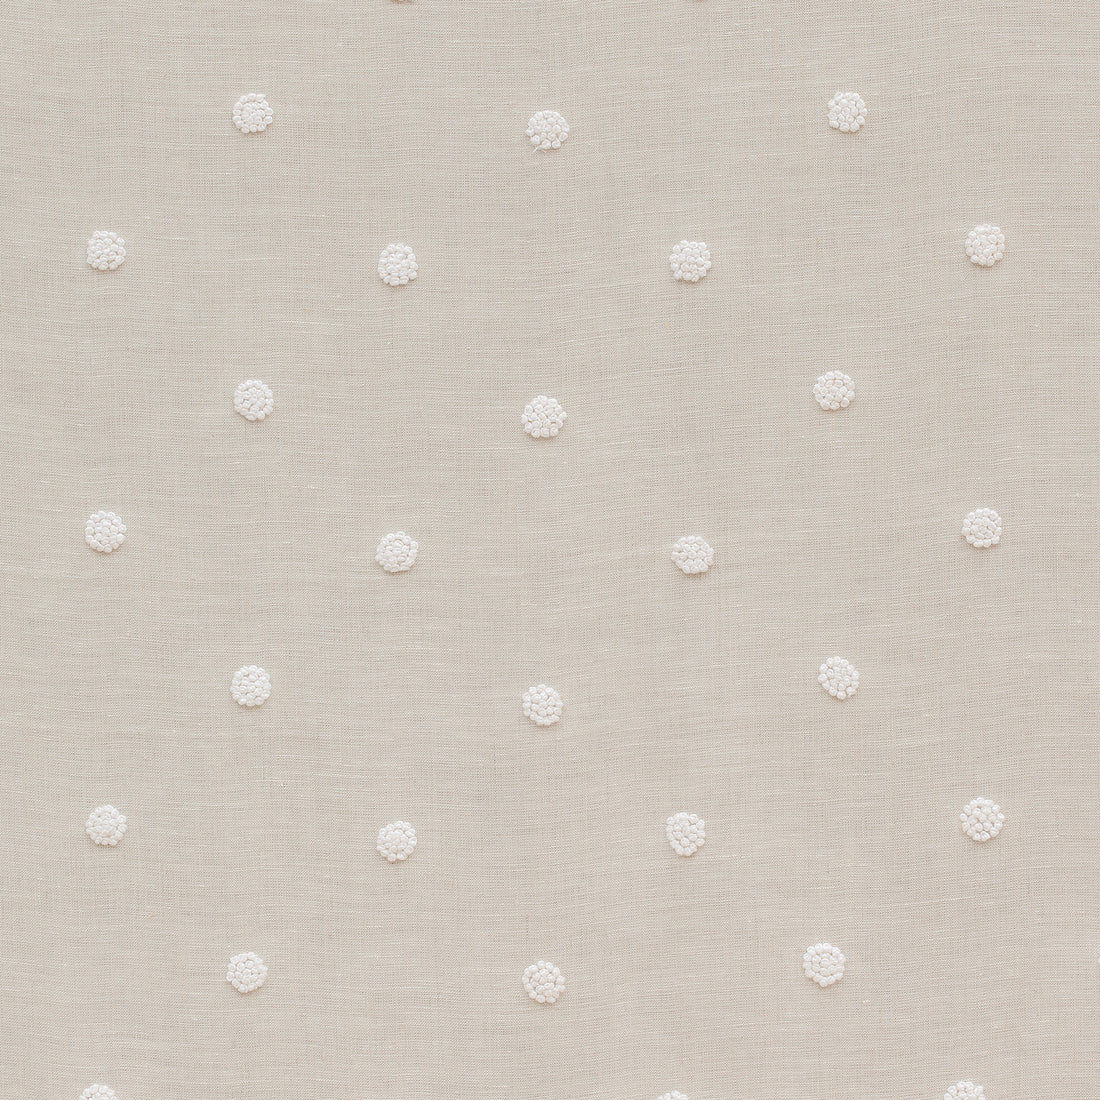 French Knot Embroidery fabric in flax color - pattern number AW73011 - by Anna French in the Meridian collection